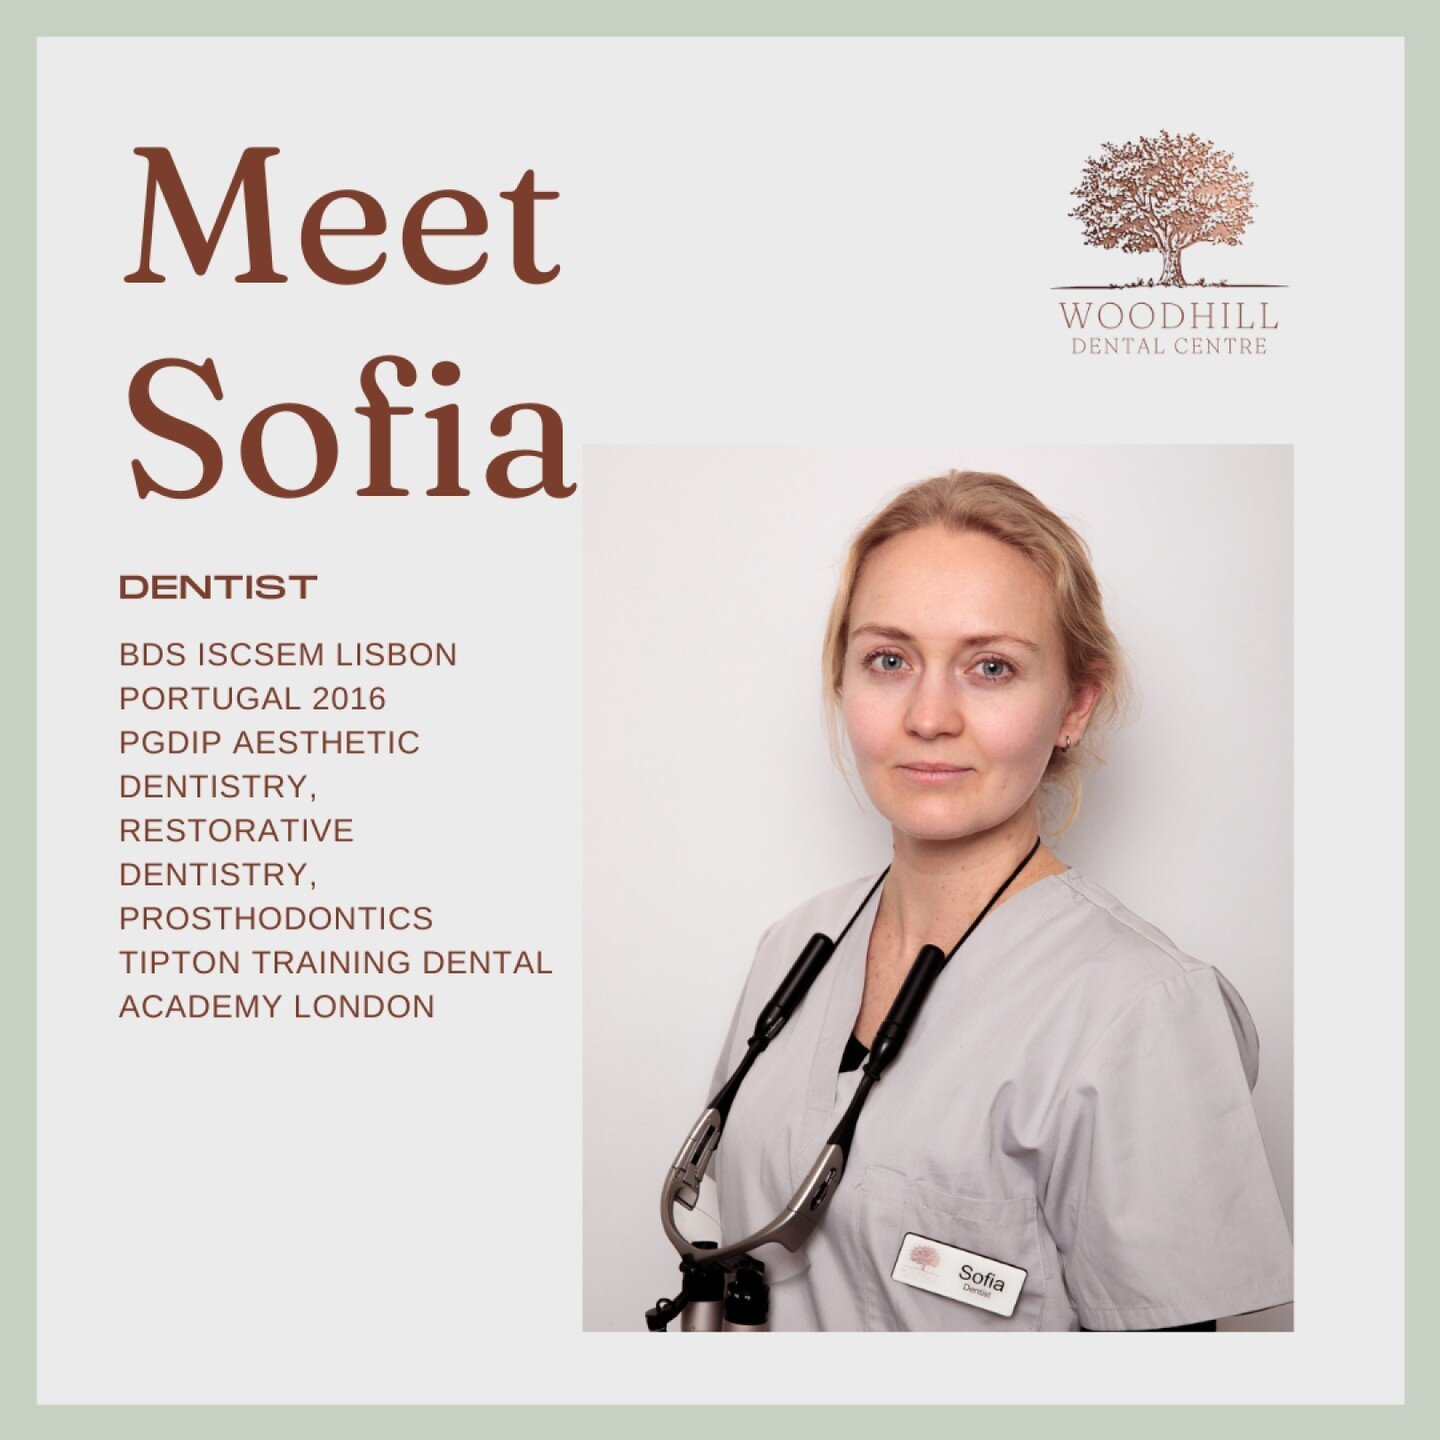 Meet The Team Monday - Introducing Dr. Sofia Musatova:

Dr. Sofia Musatova obtained her dentistry qualifications from the University of Egas Moniz (ISCSEM) in Lisbon, Portugal. Since then, she has been working in private practices as a general dentis